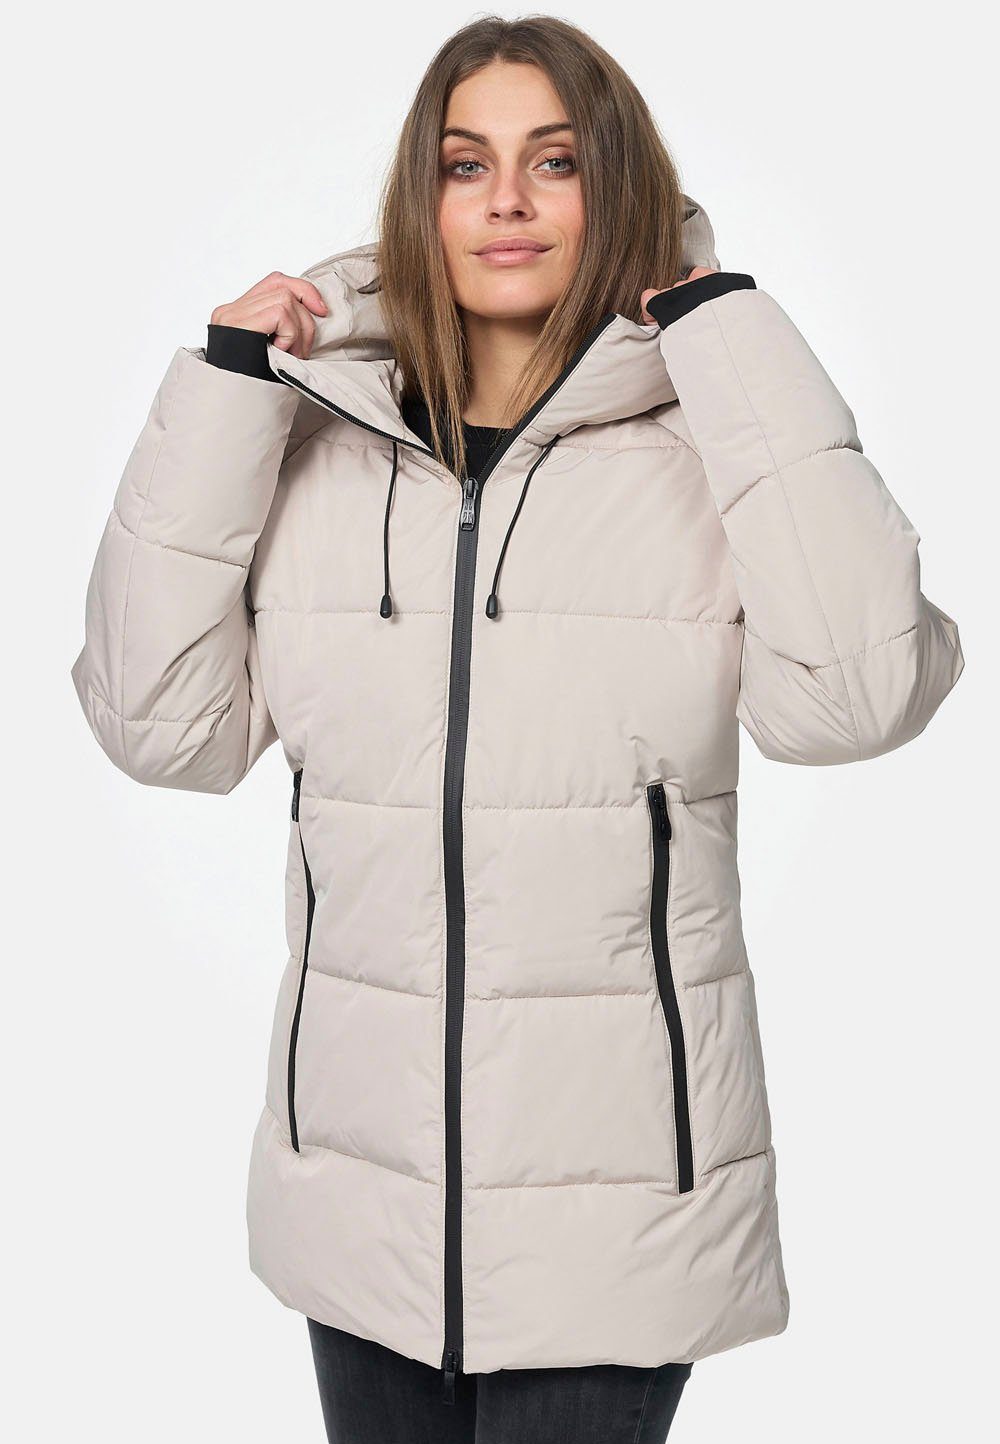 SALLY Outdoorjacke Lonsdale Sand